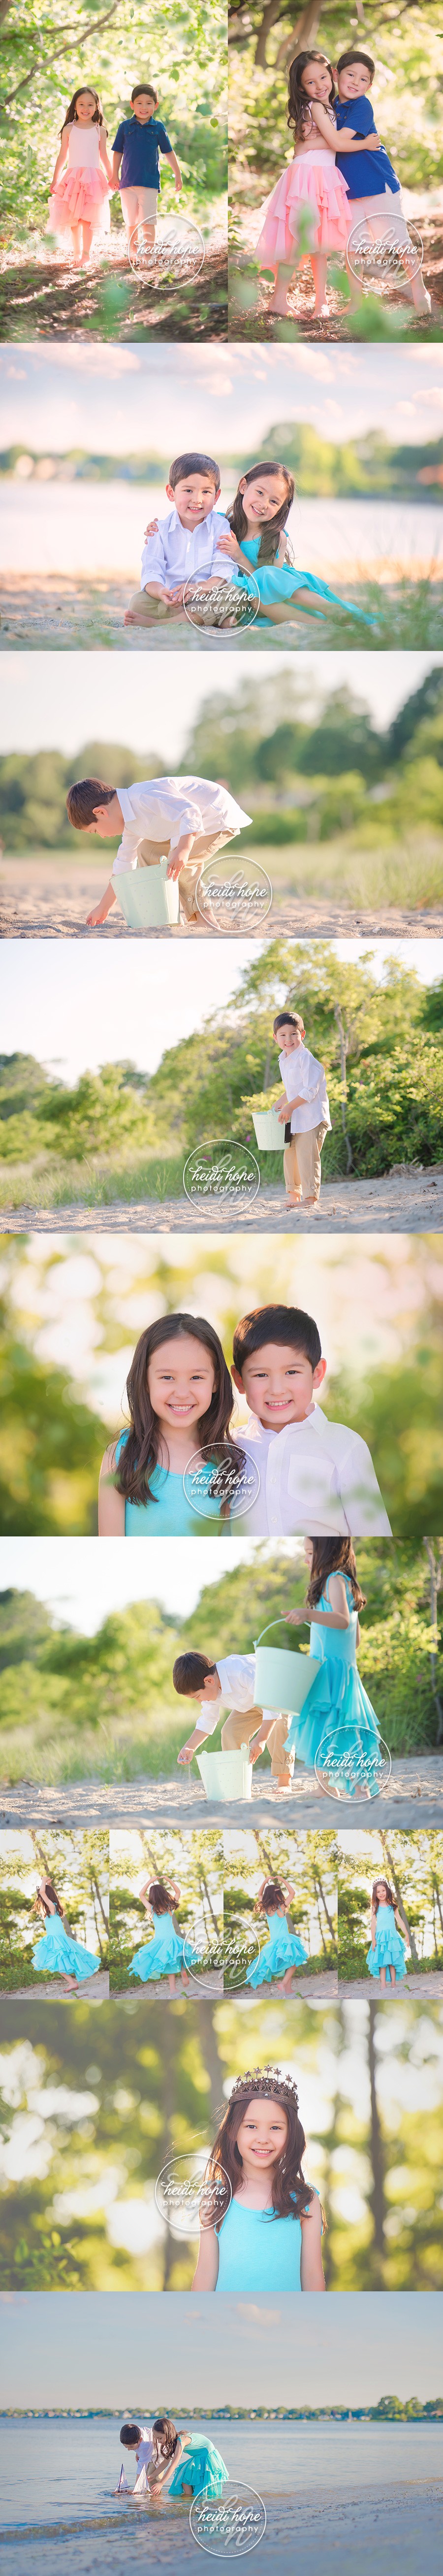 brother-and-sister-childrens-portraits-on-the-beach-in-rhode-island-web